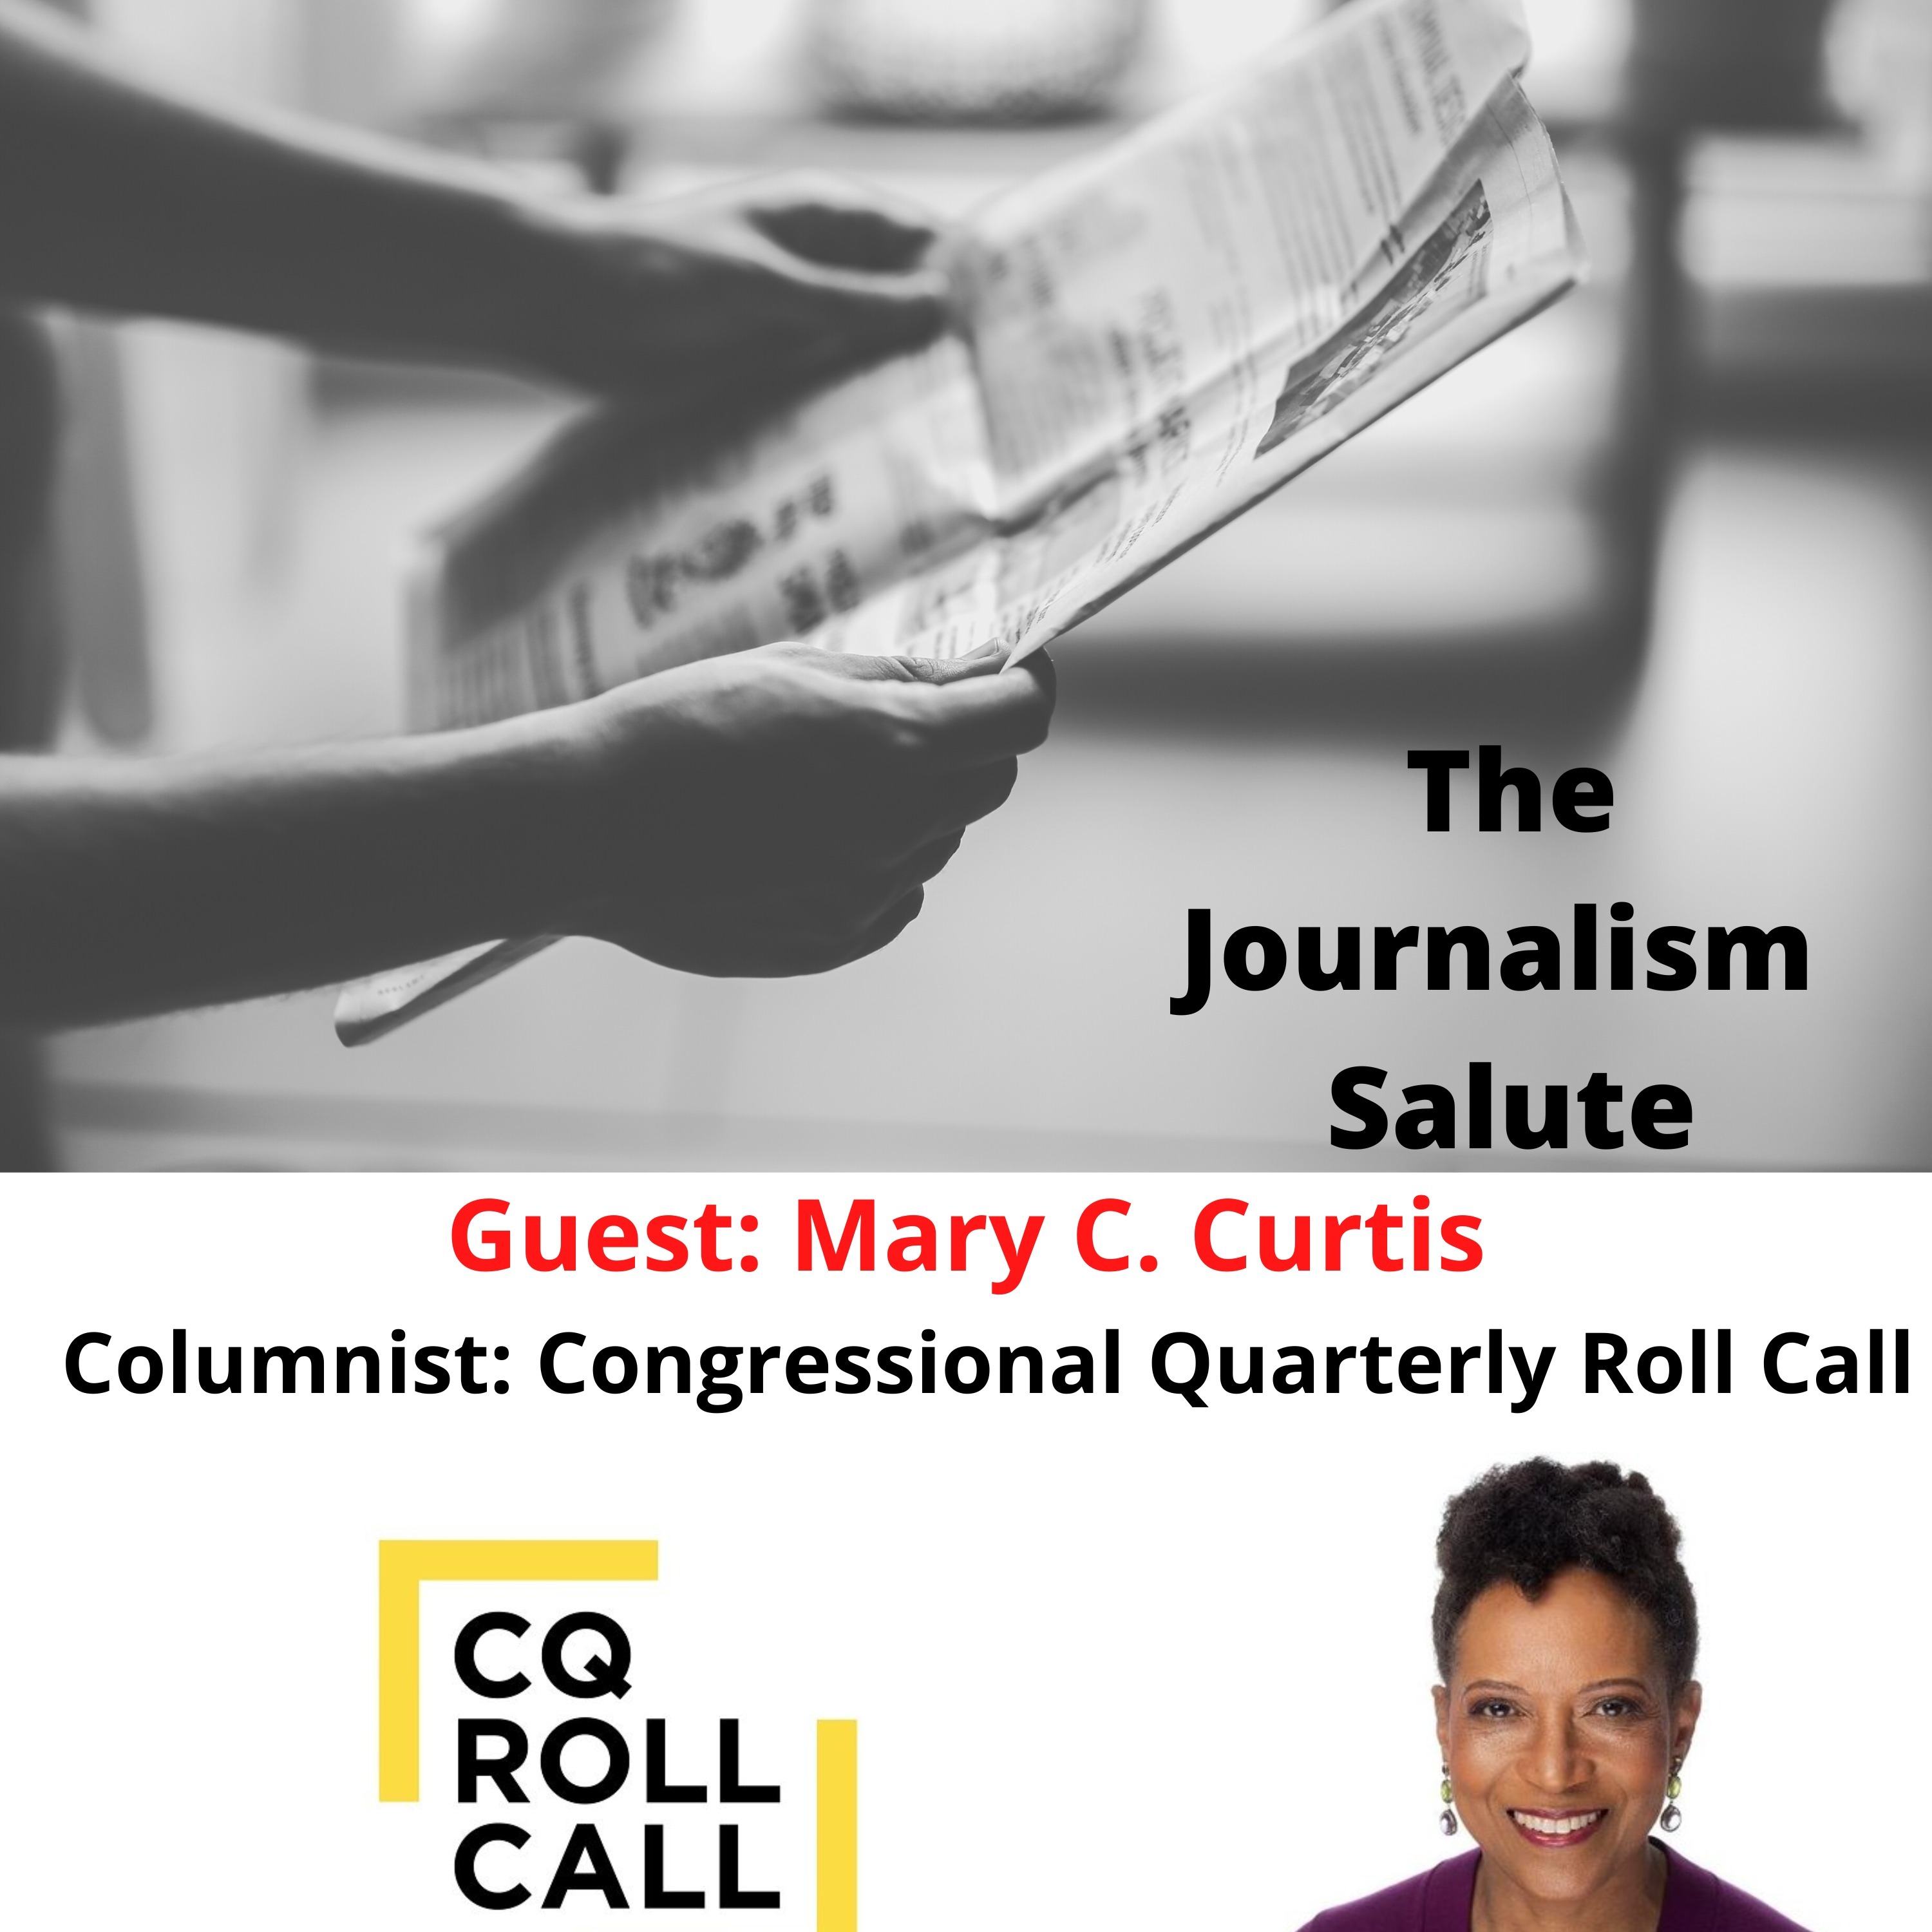 Mary C. Curtis, Columnist: Congressional Quarterly Roll Call